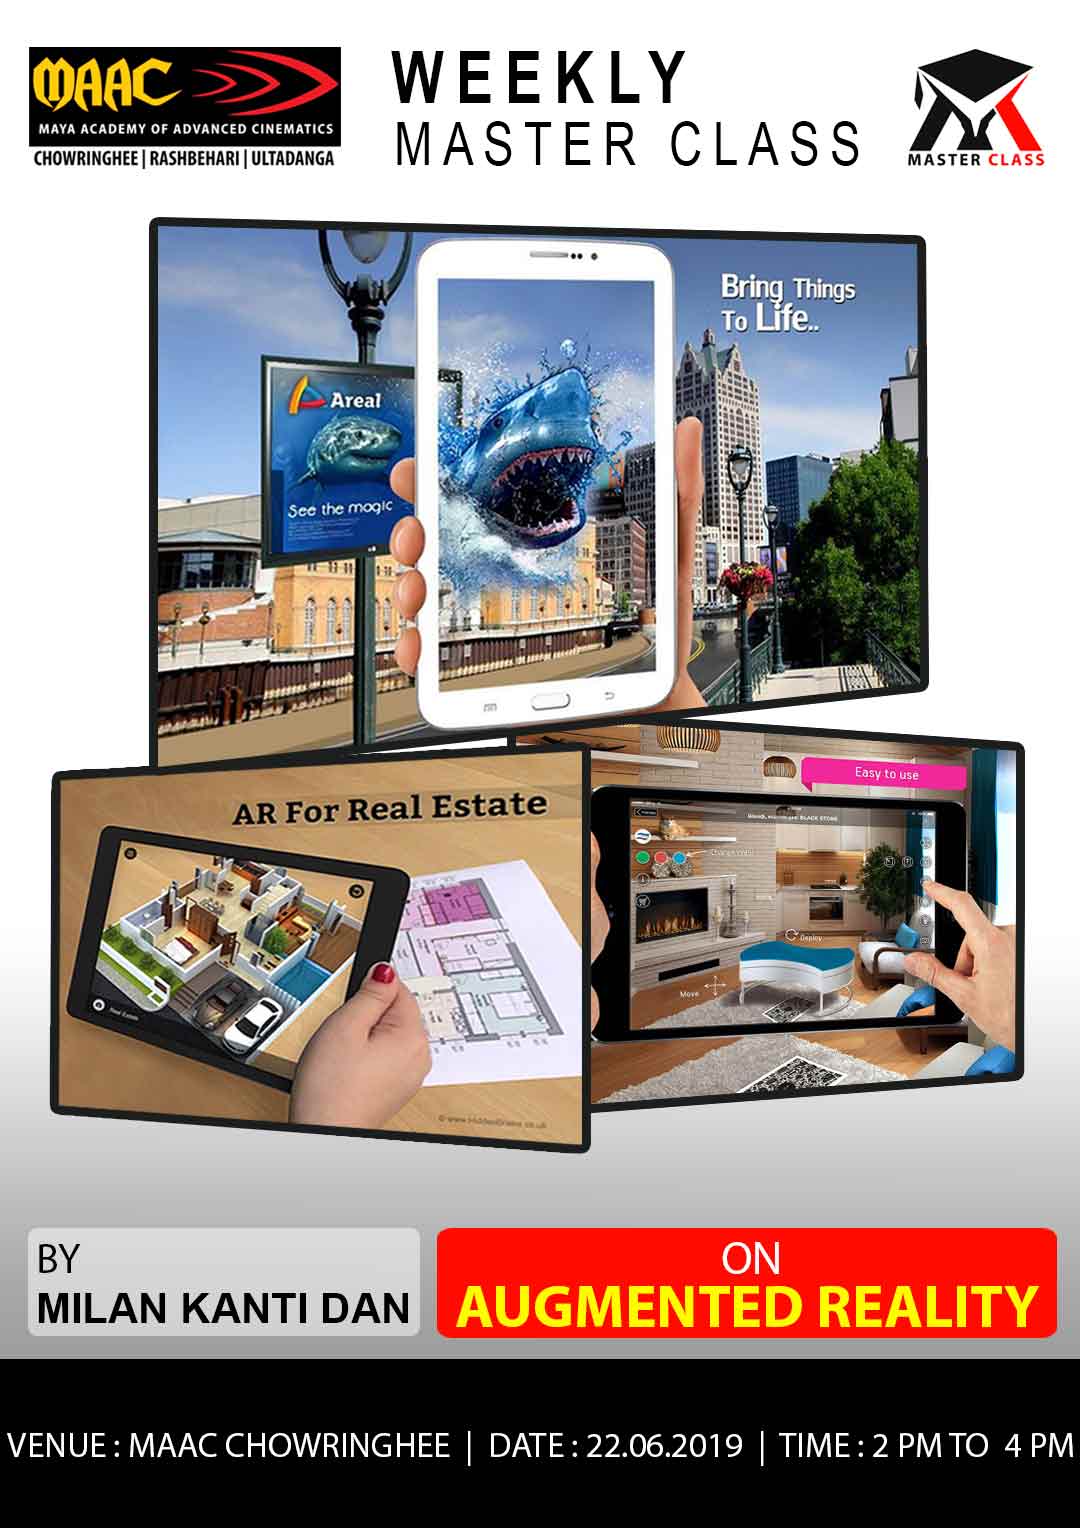 Weekly Master Class on Augmented Reality